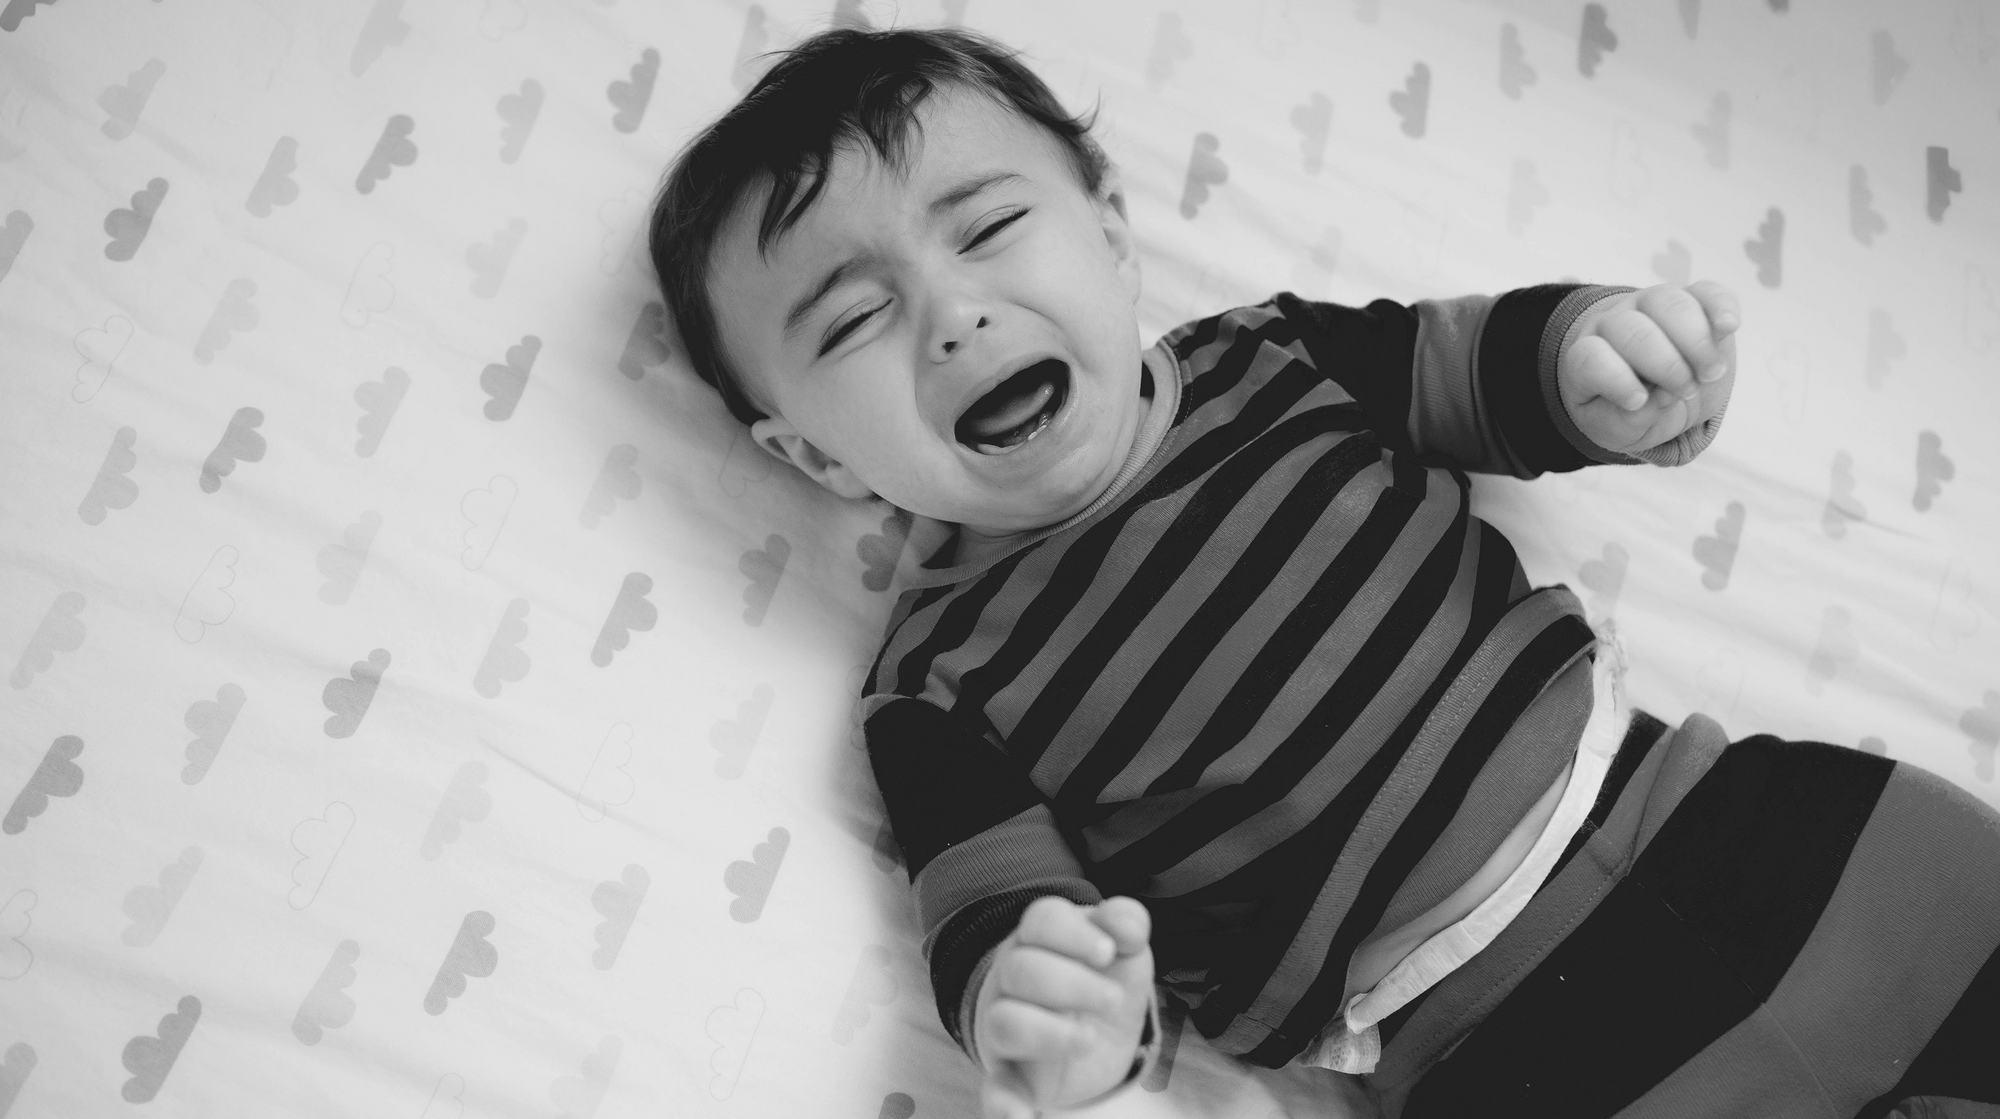 Causes, Solutions, and Tips for Infant Sleep Regressions